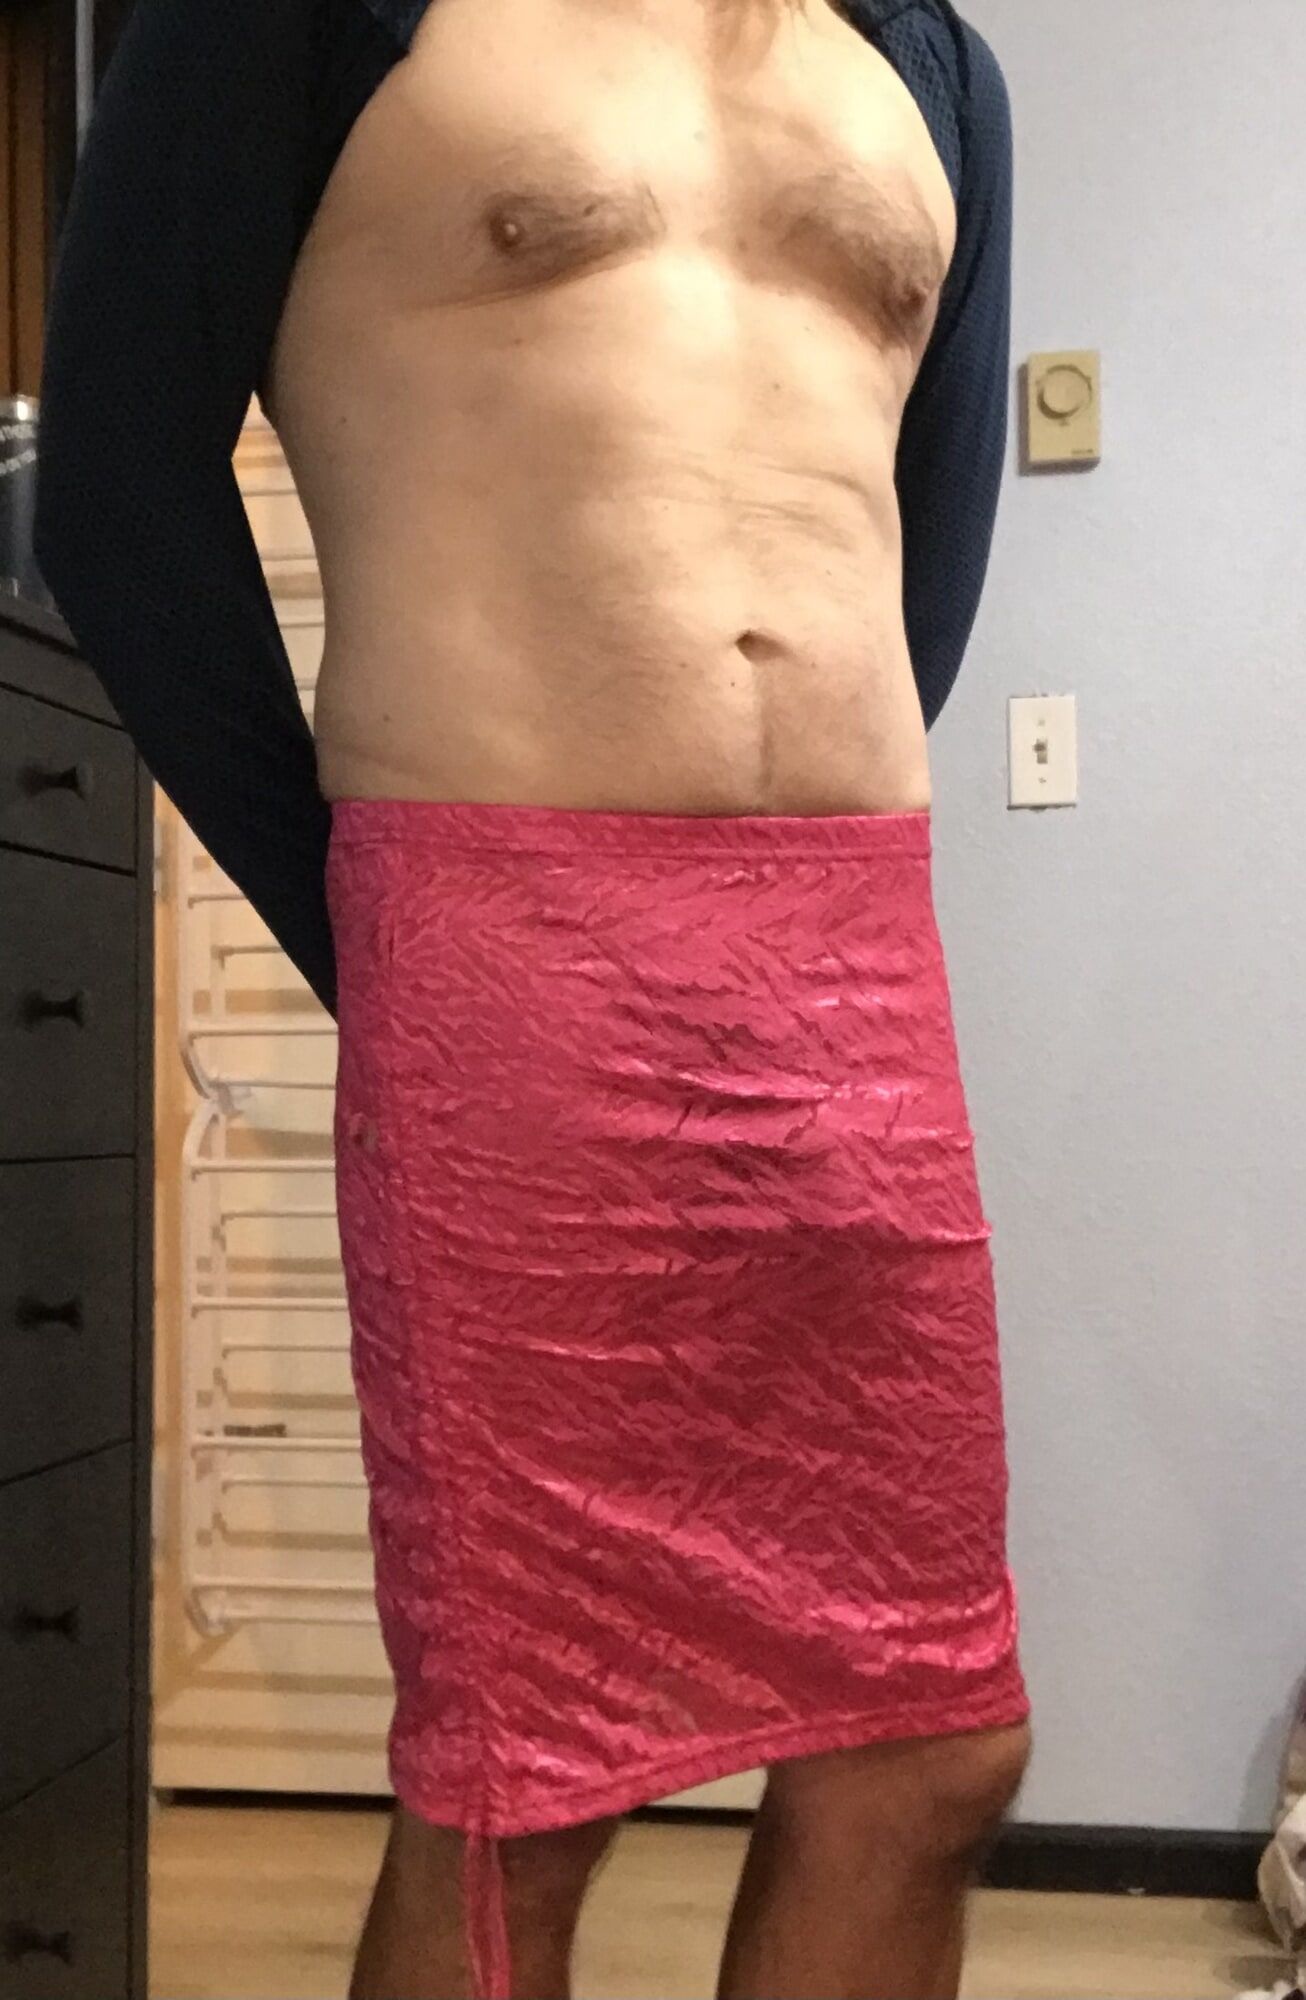 My lil bulge in some skirts #28